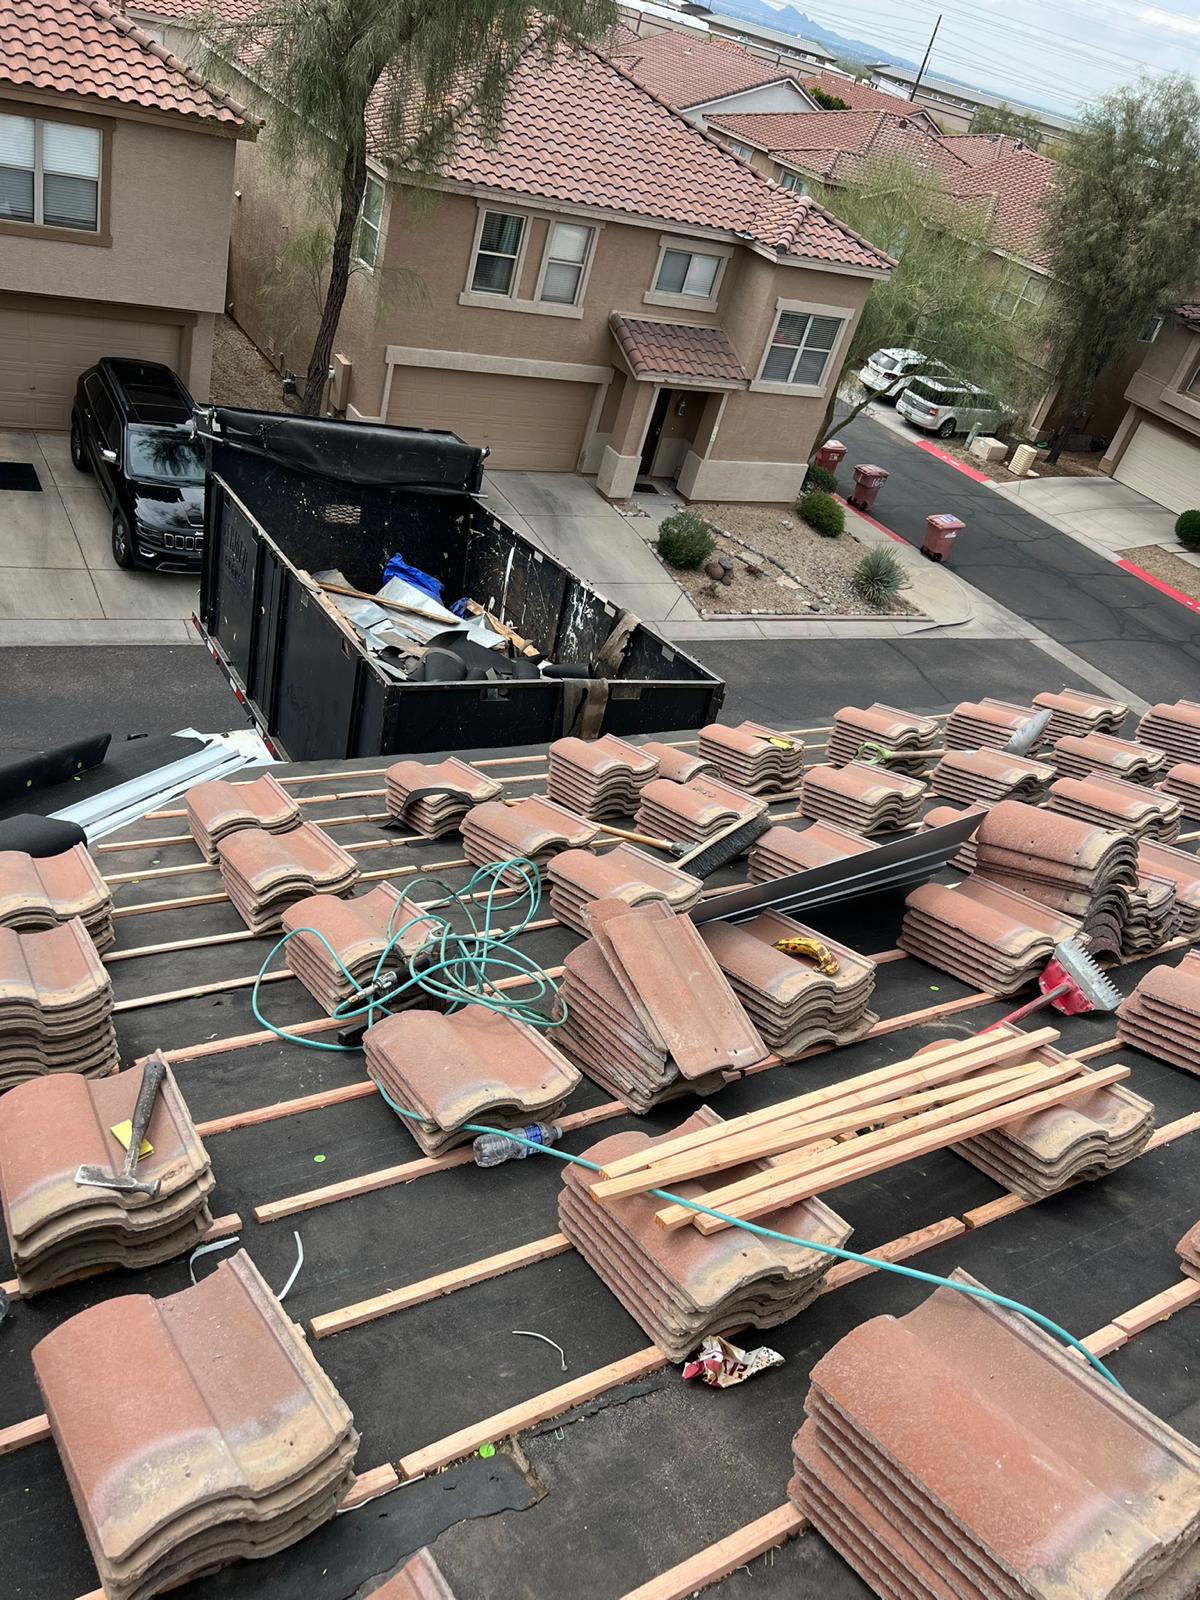 Piles of tiles prepped for roofing on a Tempe residential site.